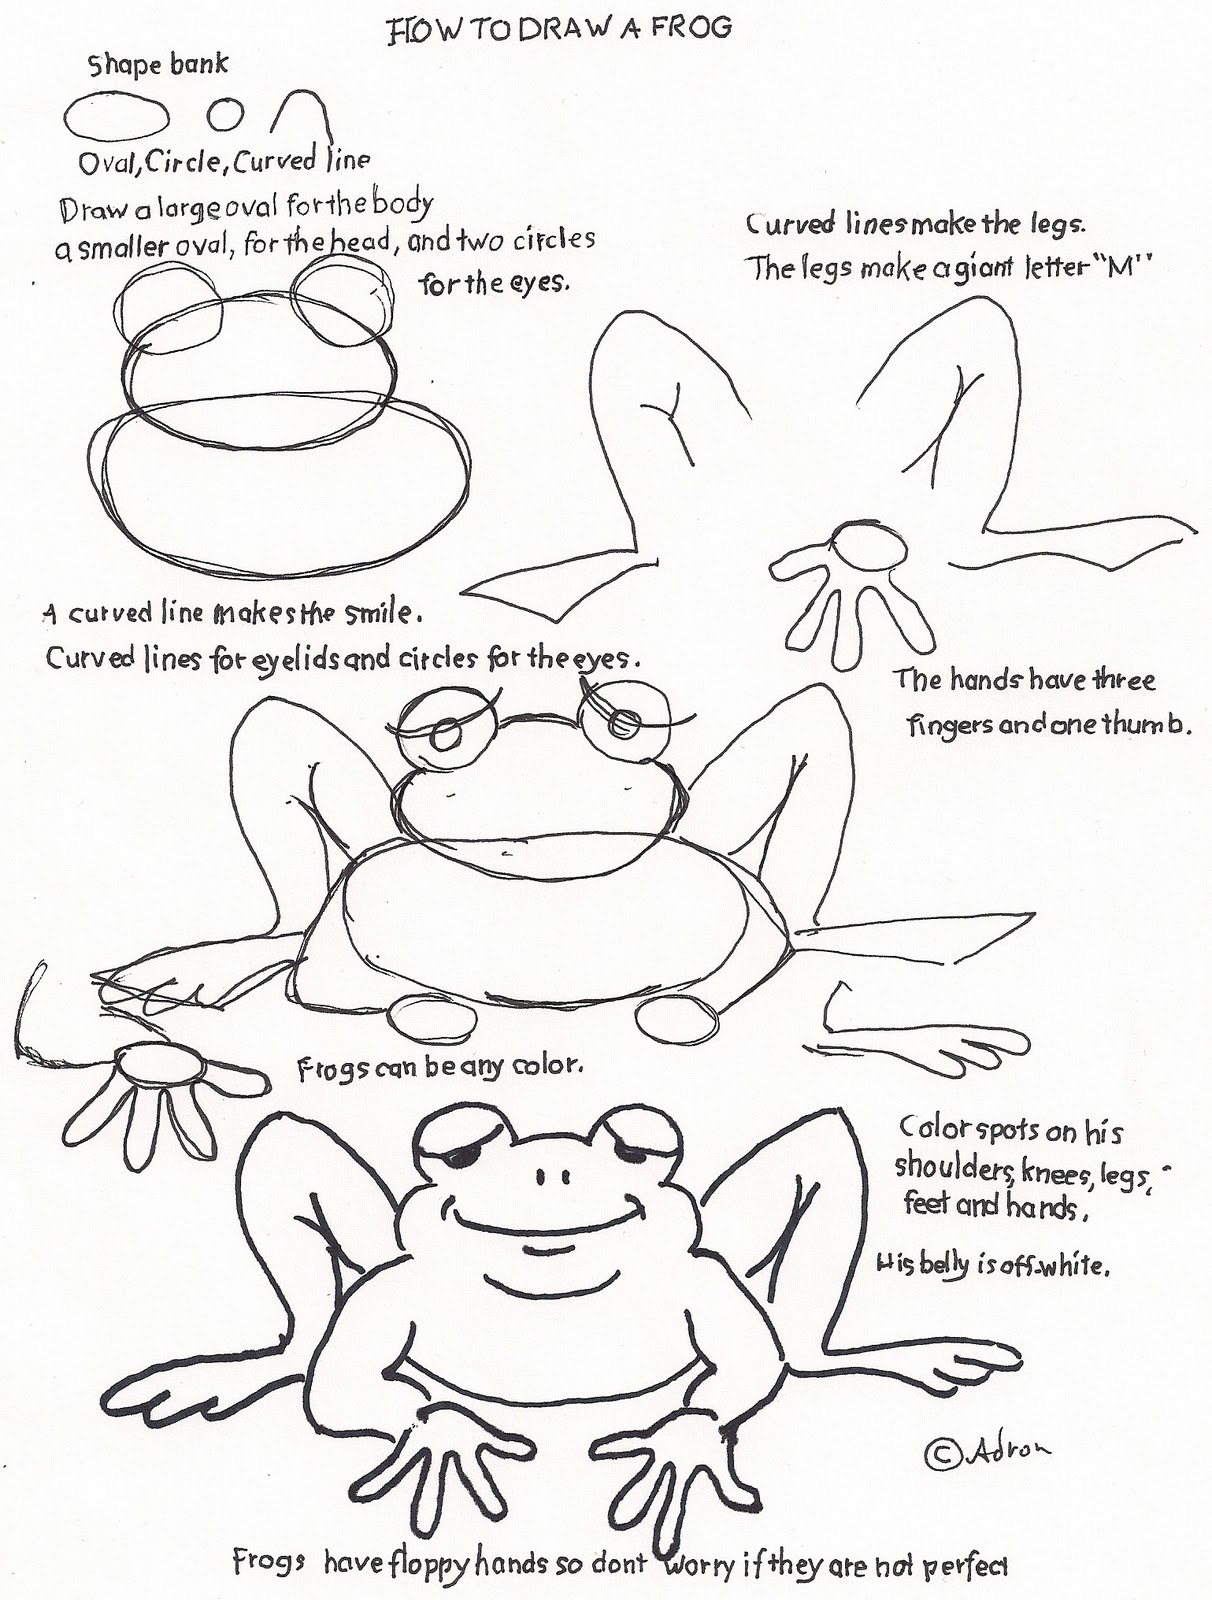 How to Draw Worksheets for The Young Artist: How to Draw a Frog